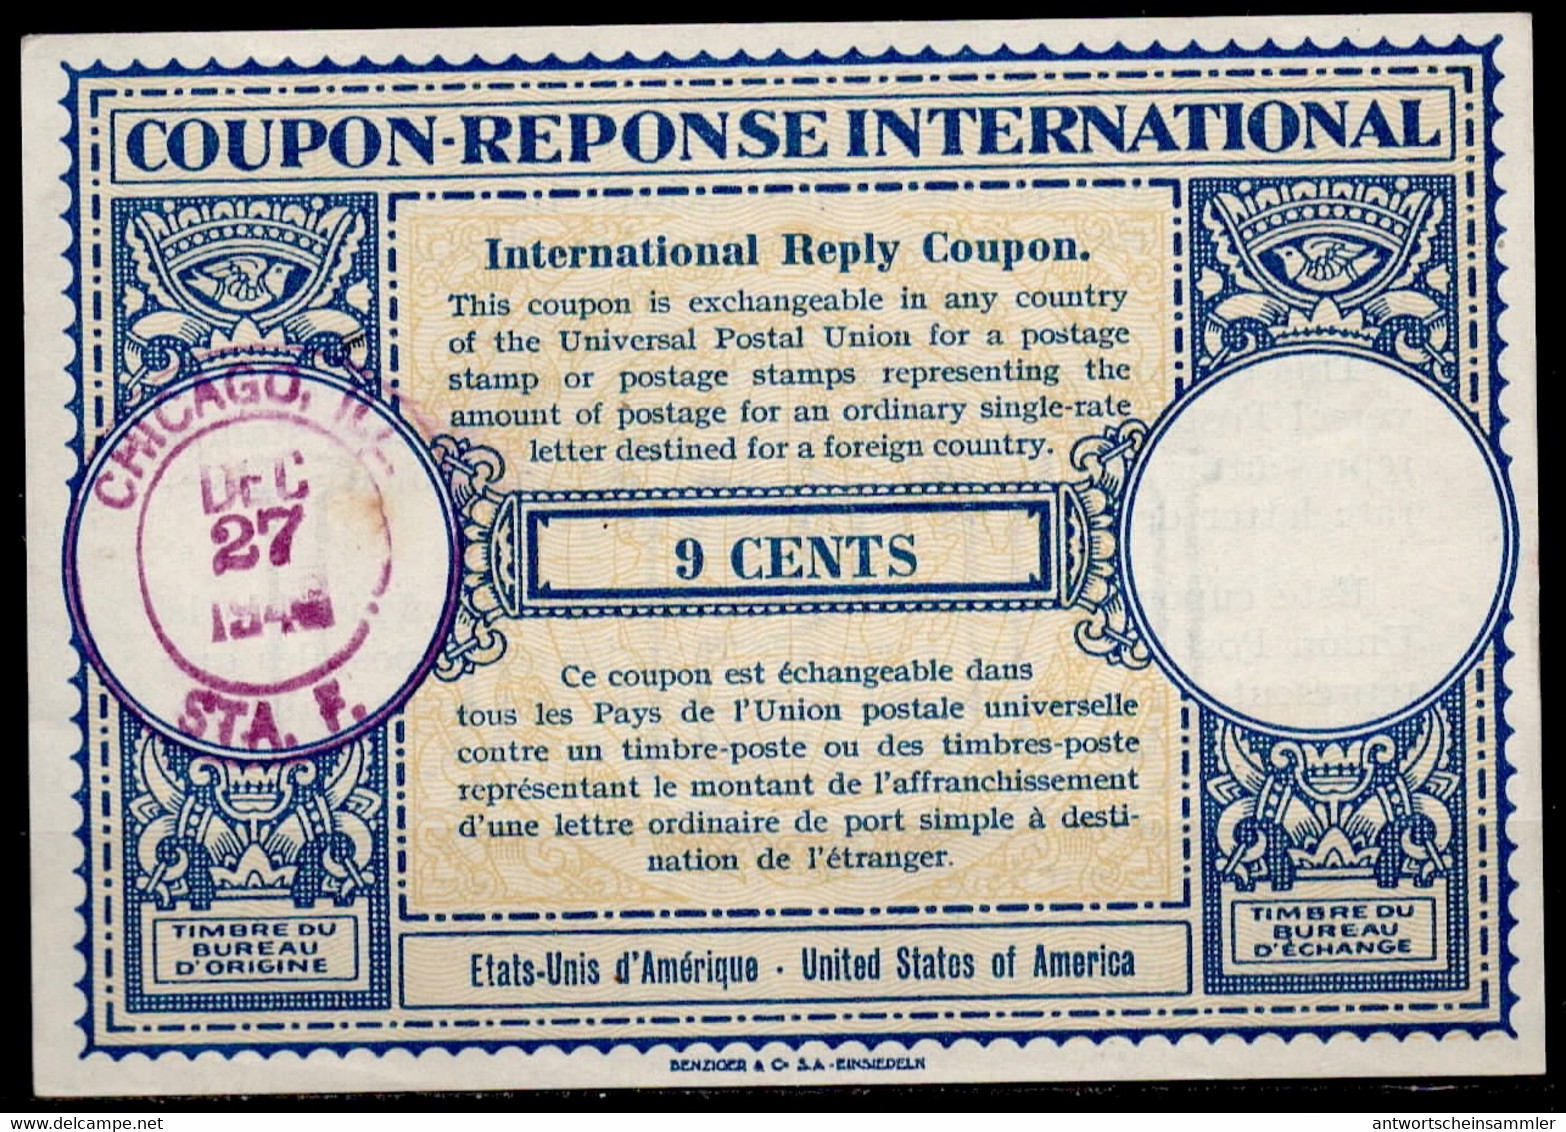 USA  Lo14  9 CENTS  International Reply Coupon Reponse Antwortschein IAS IRC O CHICAGO ILL. STA. F.  27 DEC 1948 - Non Classés